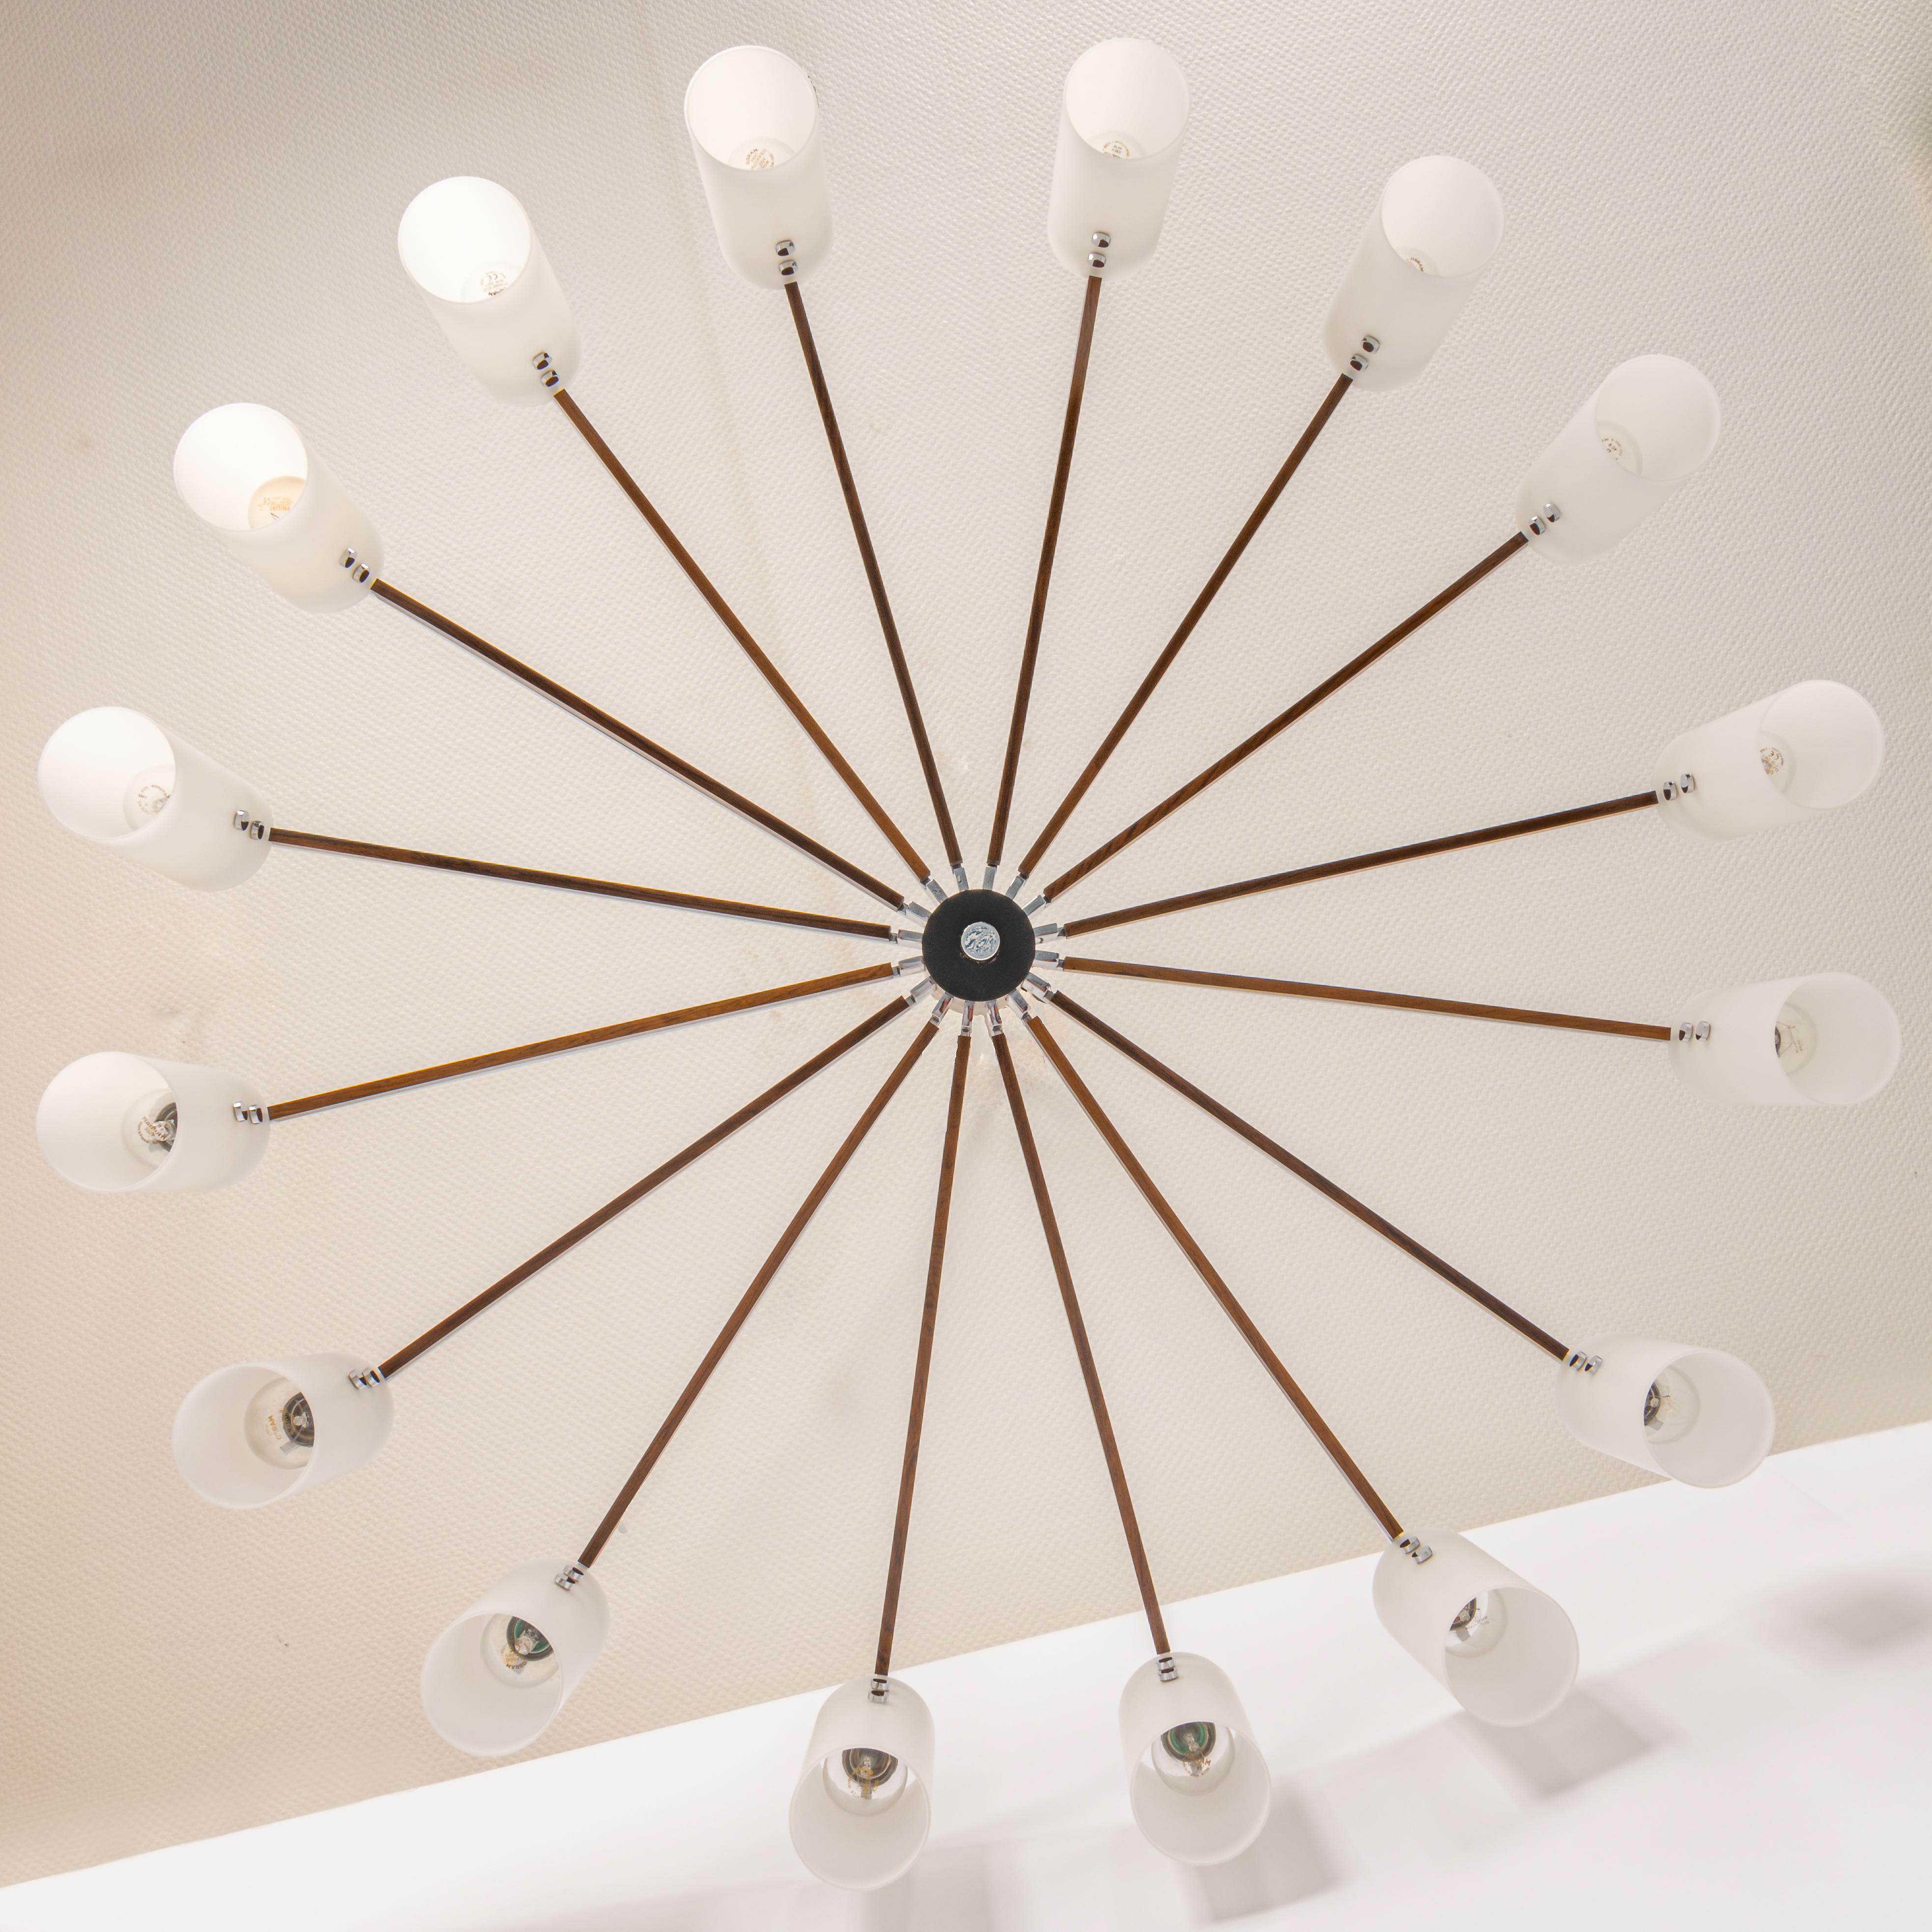 A stunning extra large sixteen-arm spider flush mount light chandelier by Kaiser Leuchten, Germany, manufactured in midcentury, circa 1970 (late 1960s or early 1970s). The fixture is in very good condition and ready to use.
Small Signs of age and